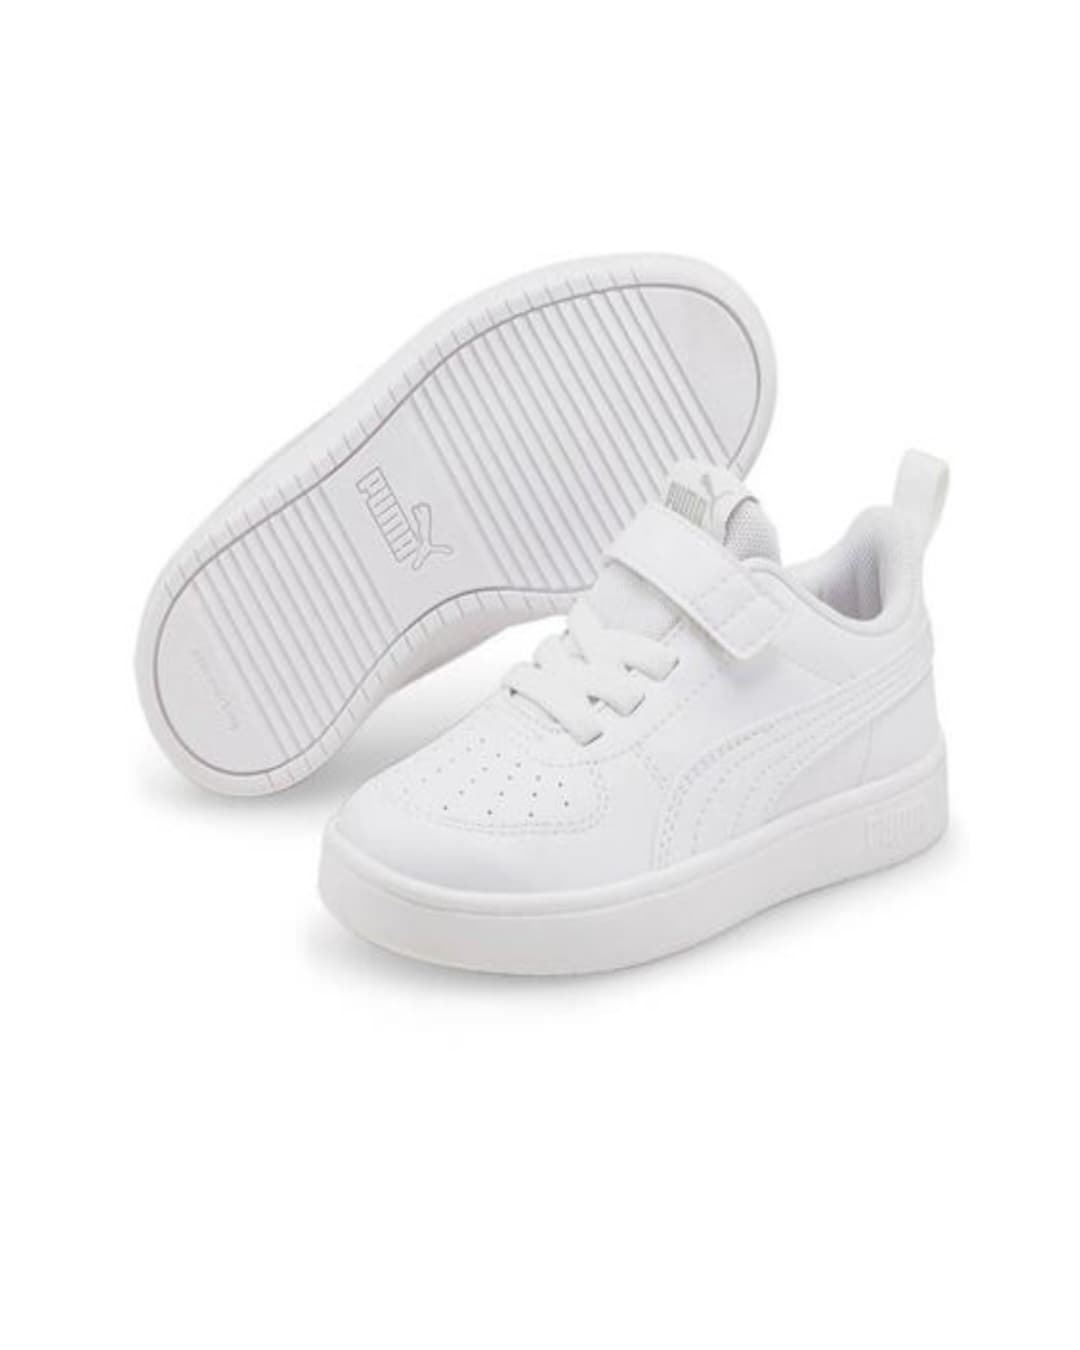 Puma Rickie White Sneakers for children with velcro - Image 3